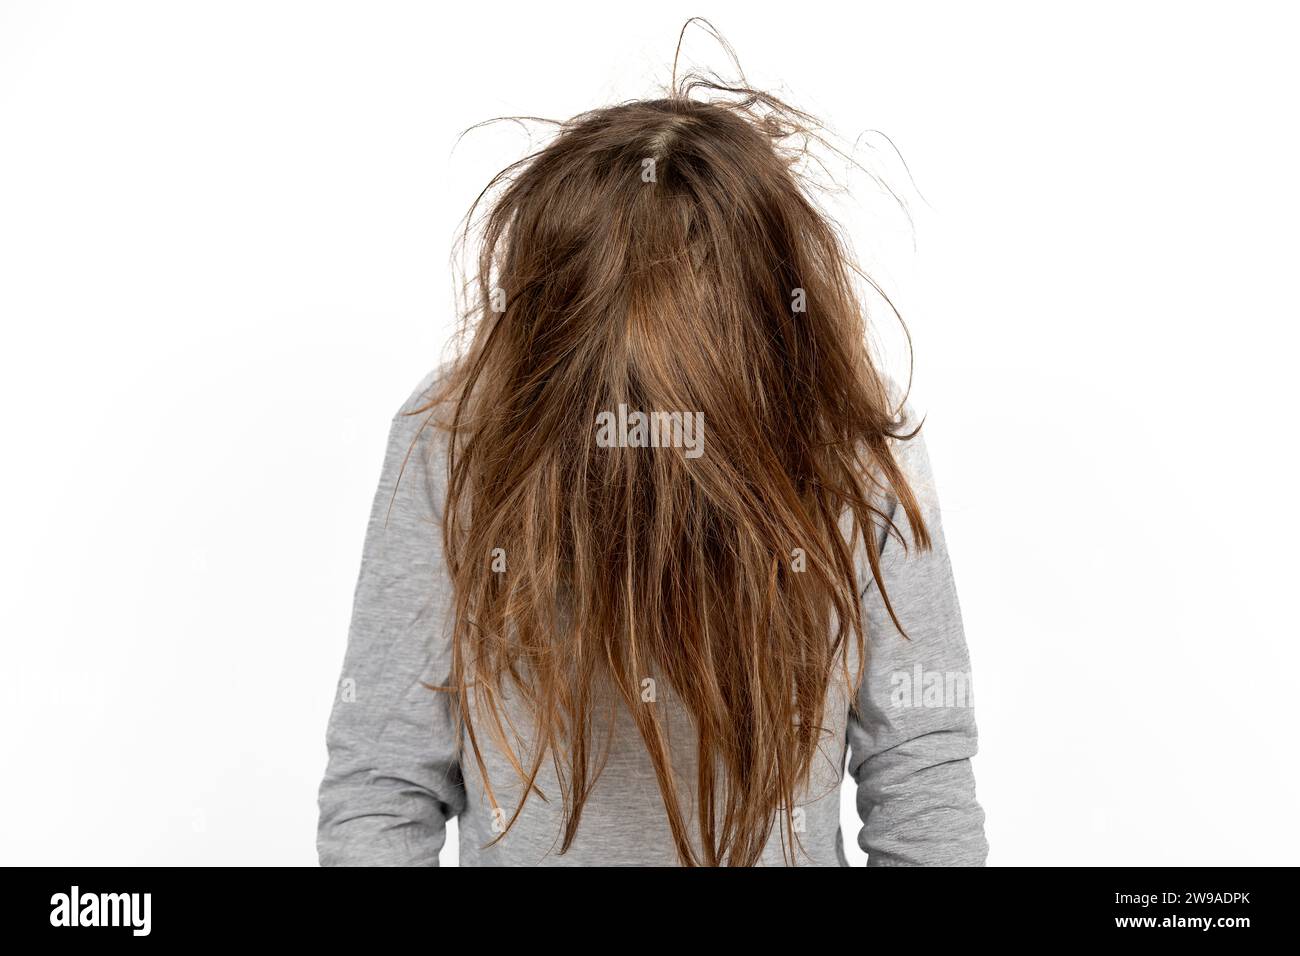 Disheartened Morning: Portrait of Young Girl on a Bad Hair Day Stock Photo